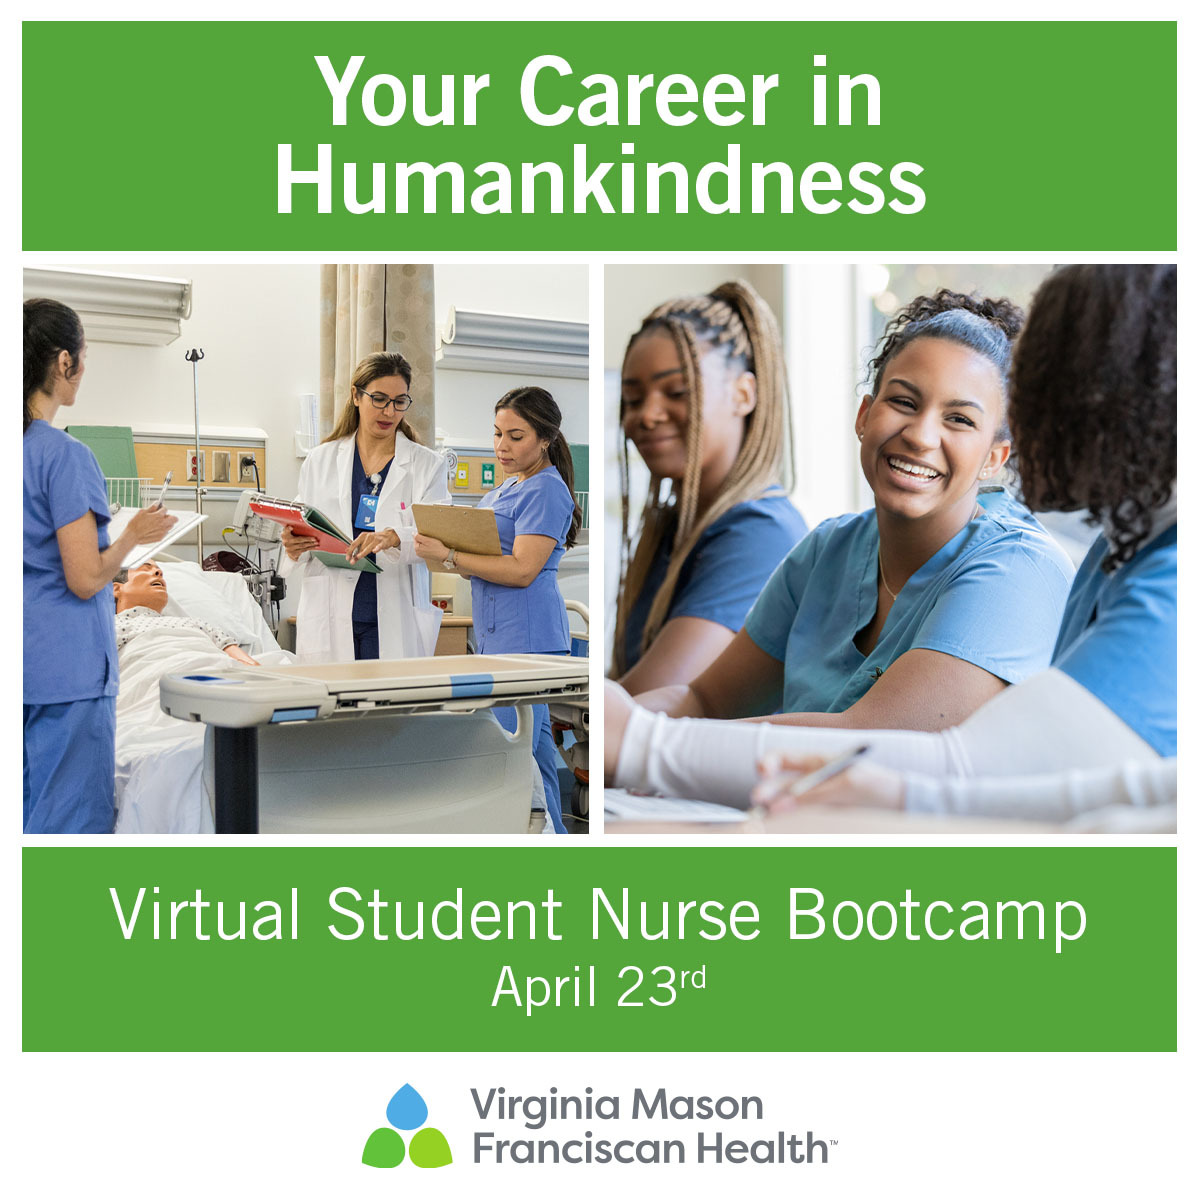 Calling all student nurses! 📣 Don't miss our Virtual Student Nursing Bootcamp on April 23rd! If you are a nursing student or know one, take a moment to RSVP, share this post! Learn more and register today: spr.ly/6015ZQNXB